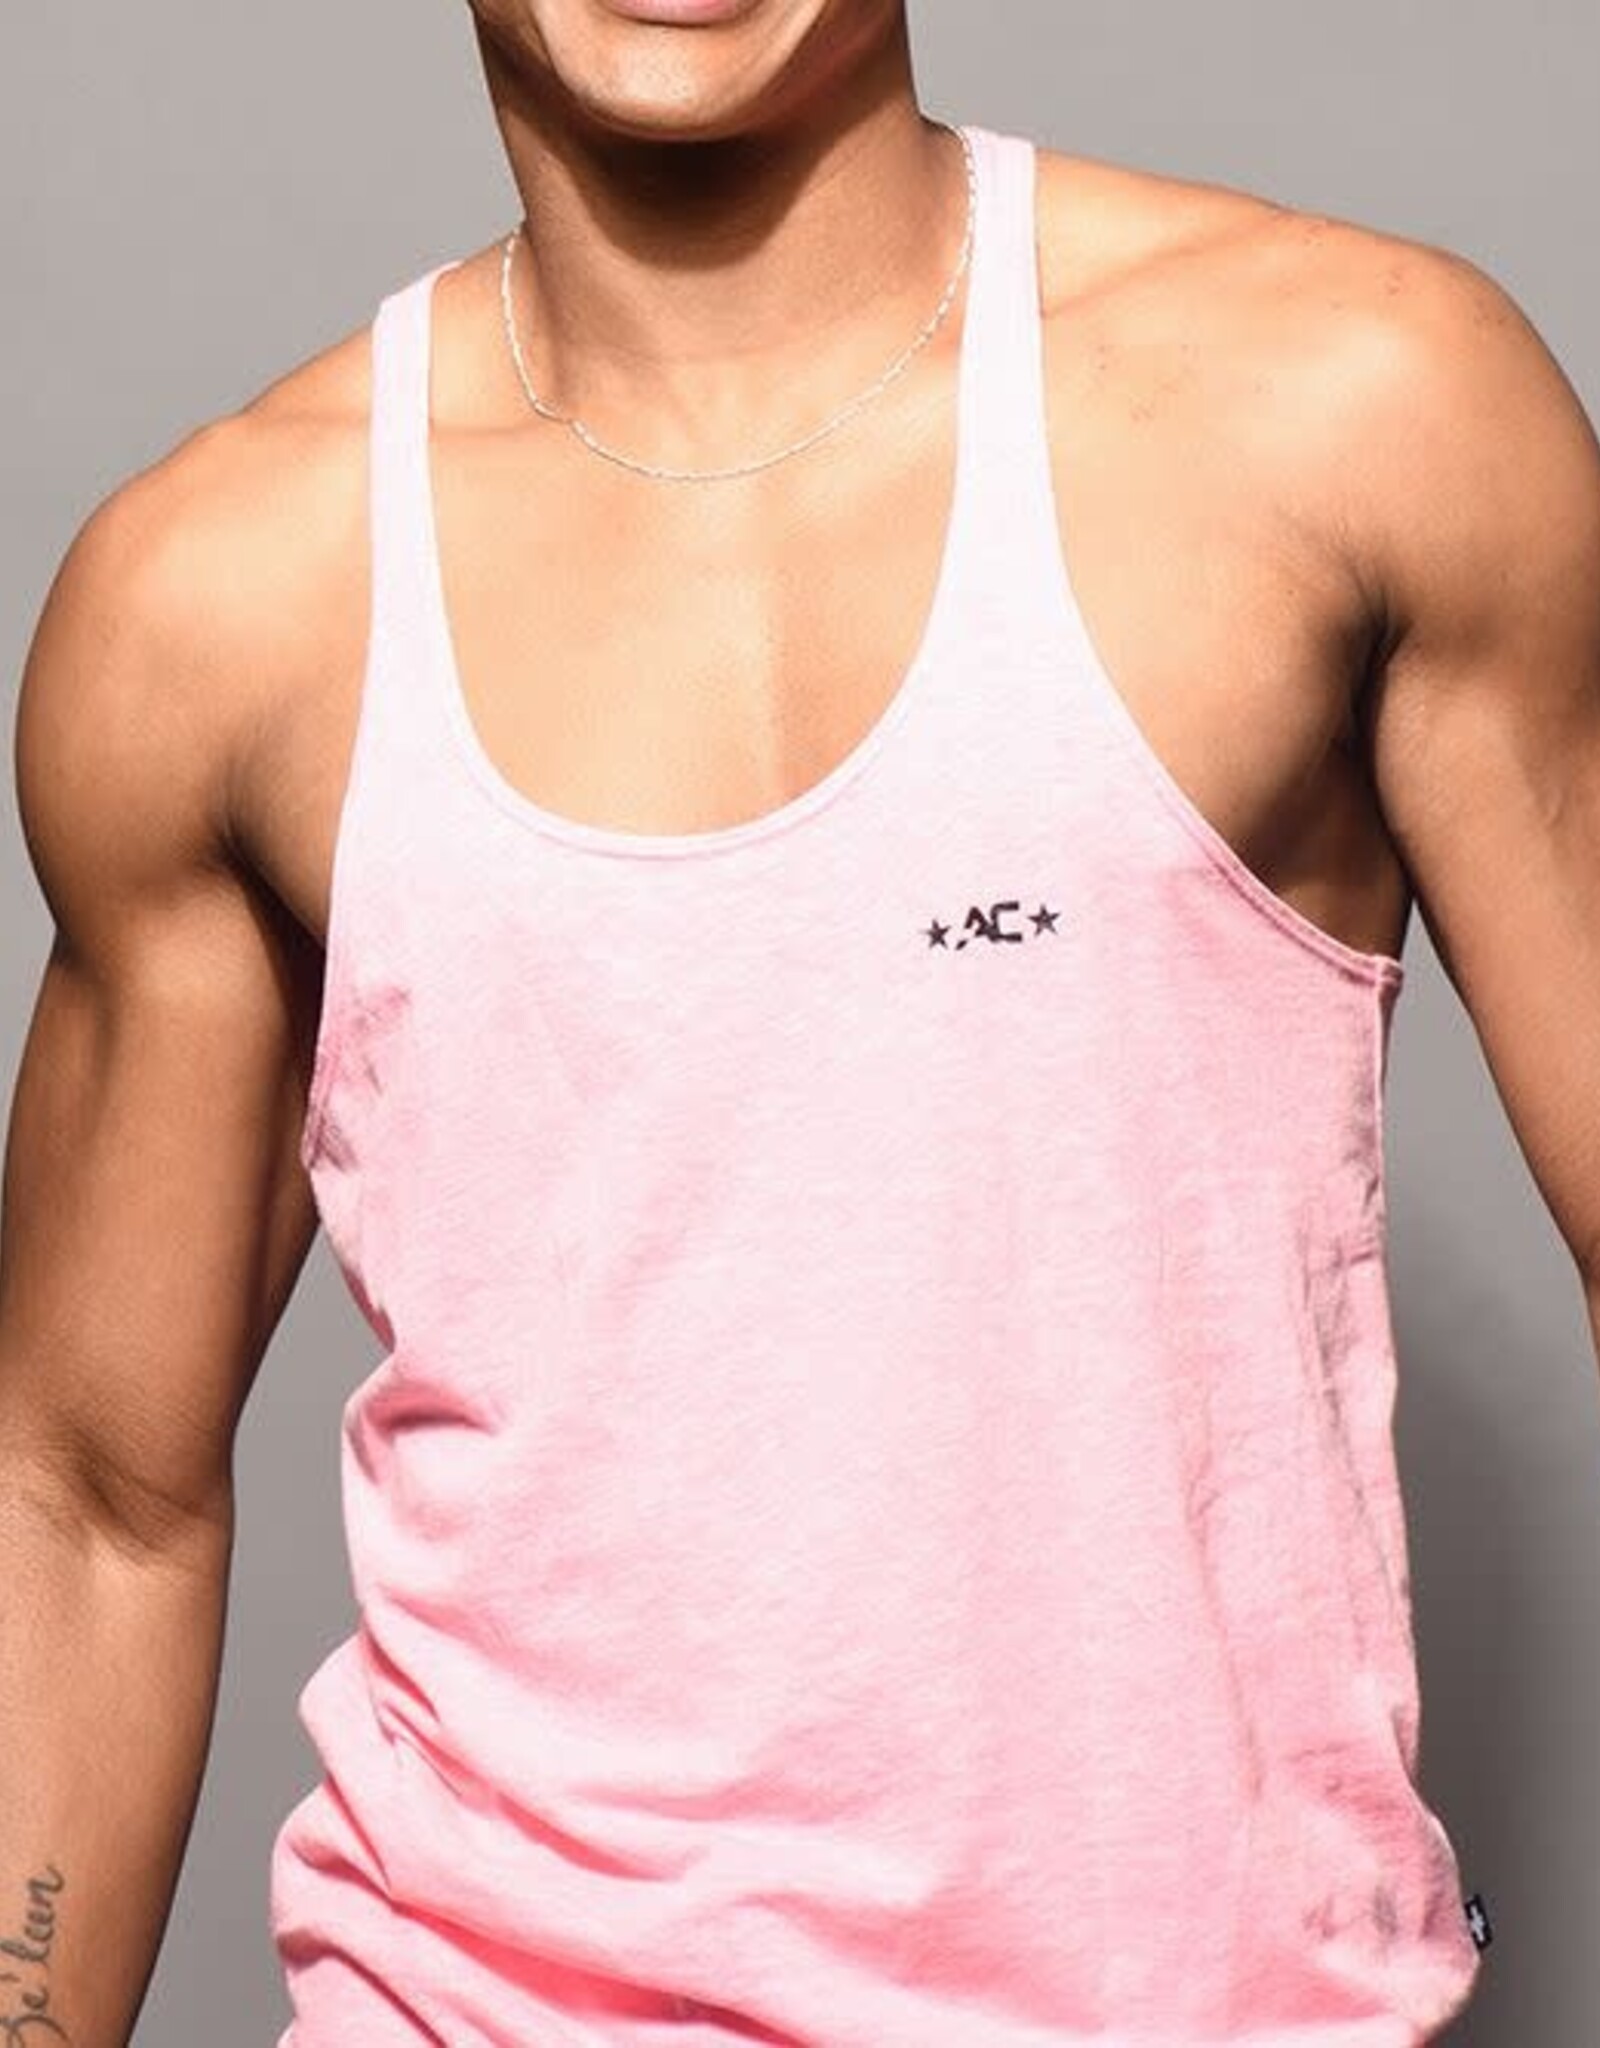 Andrew Christian Cotton Candy Tank (in-store purchase only)